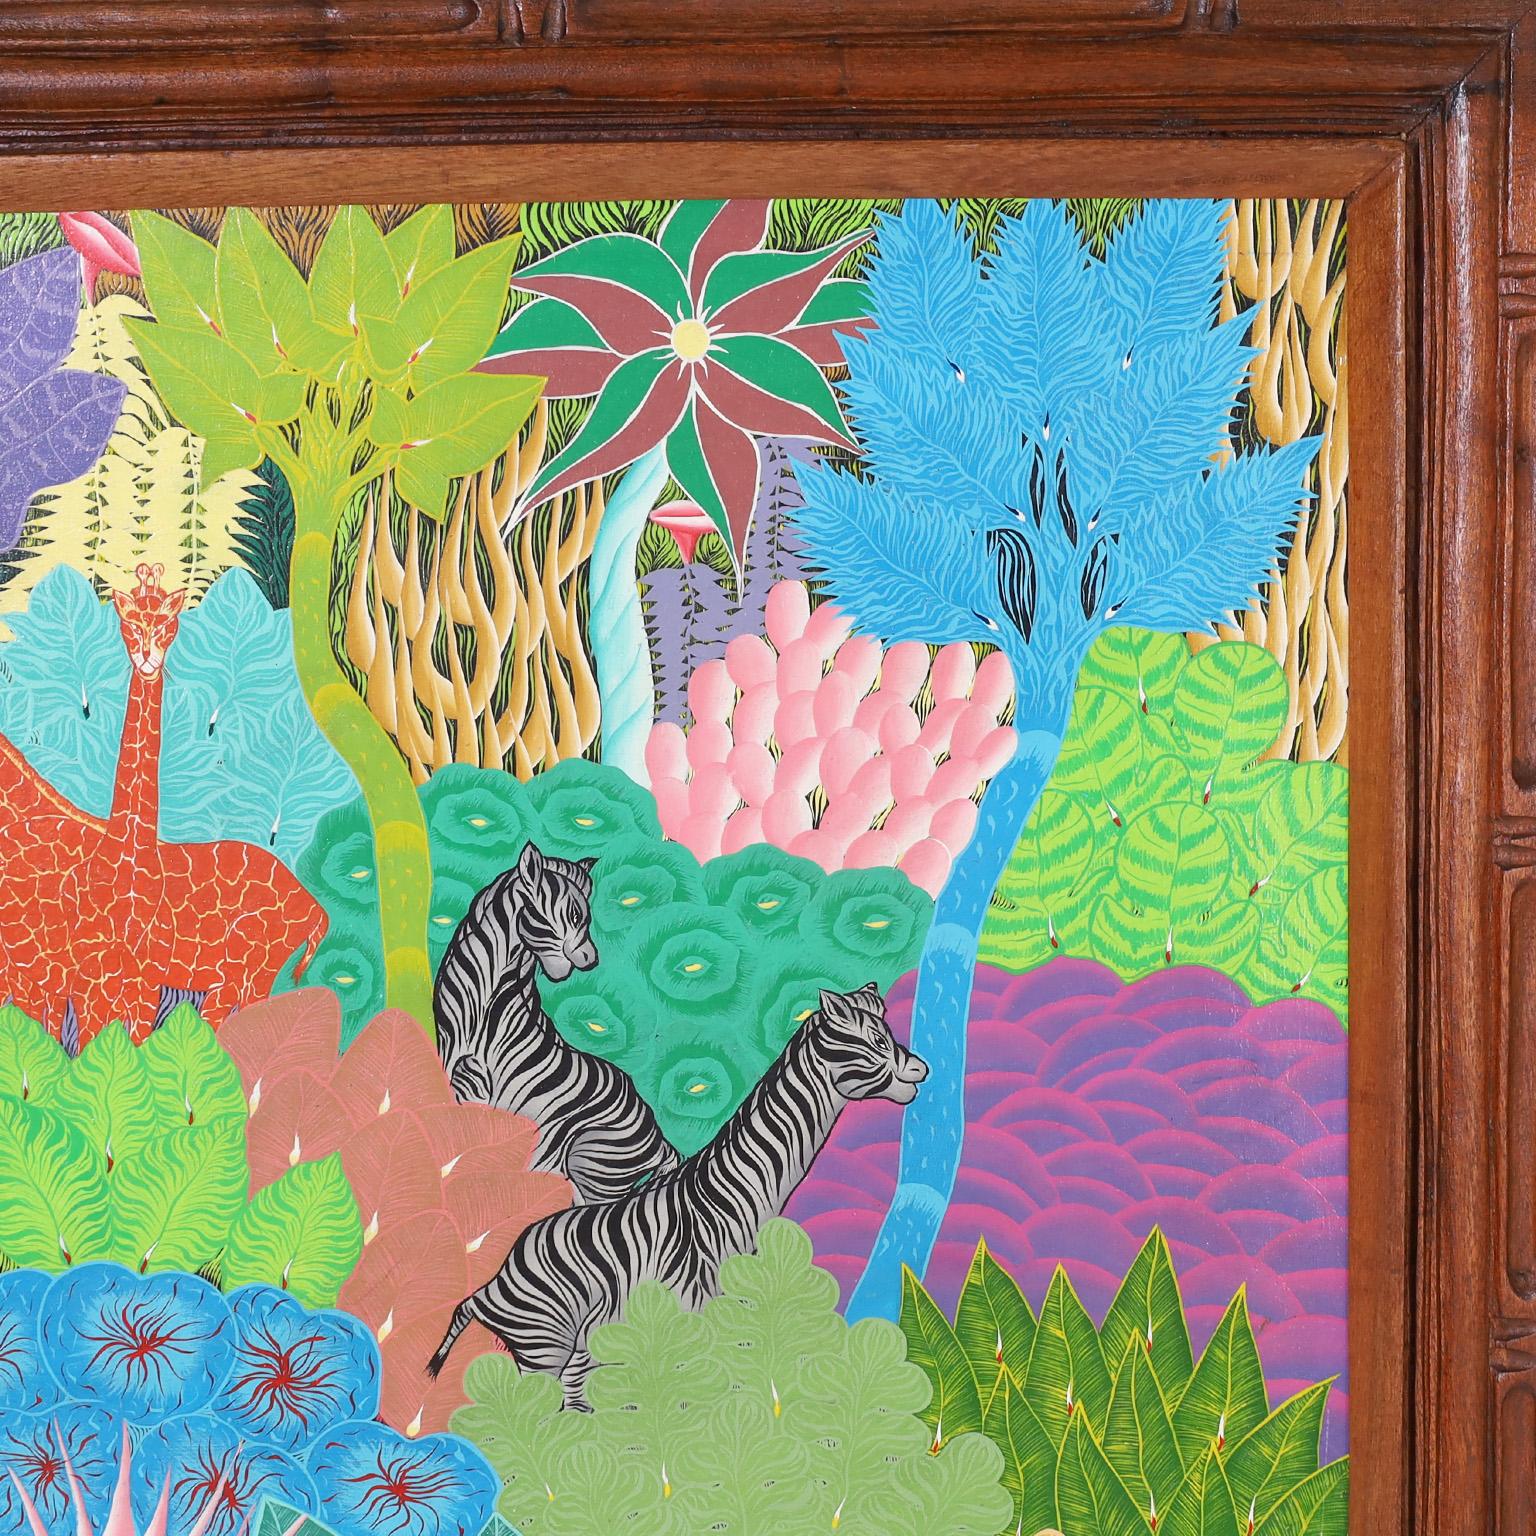 Folk Art Mid-Century Haitian Painting of Animals in a Jungle by Eustache Louber For Sale